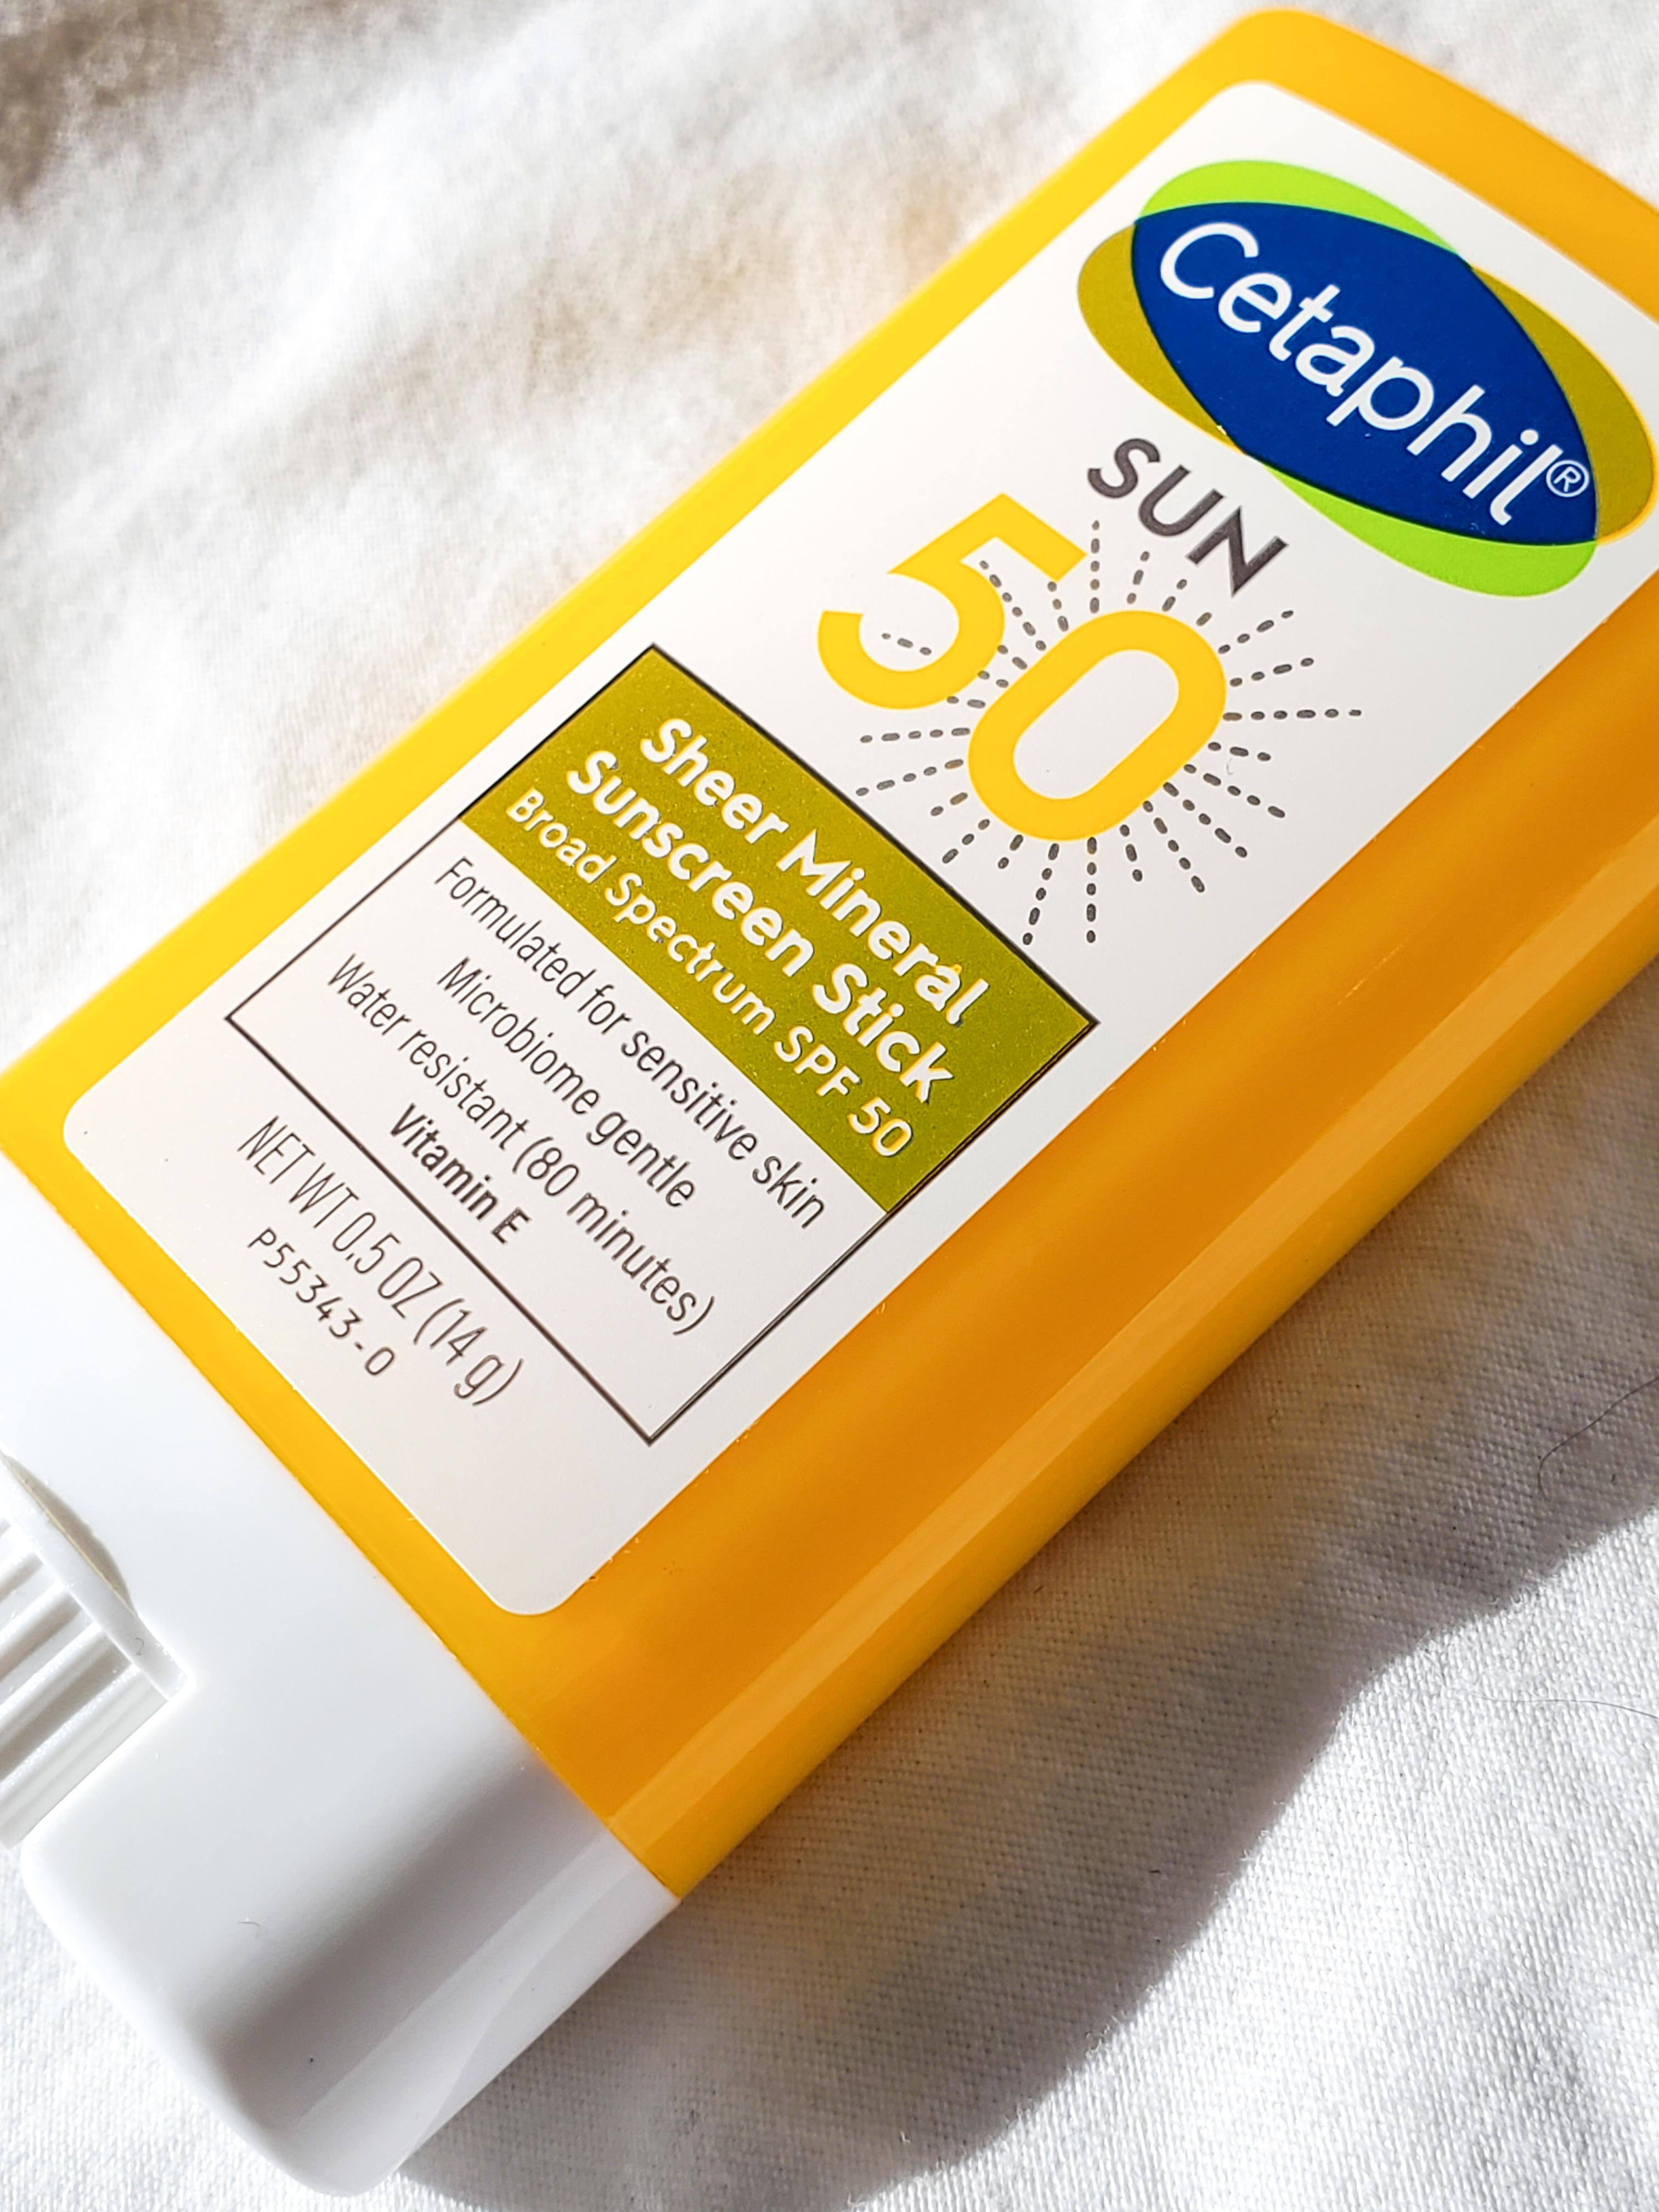 Cetaphil Sheer Mineral Sunscreen Stick SPF 50, affordable mineral sunscreen no white cast